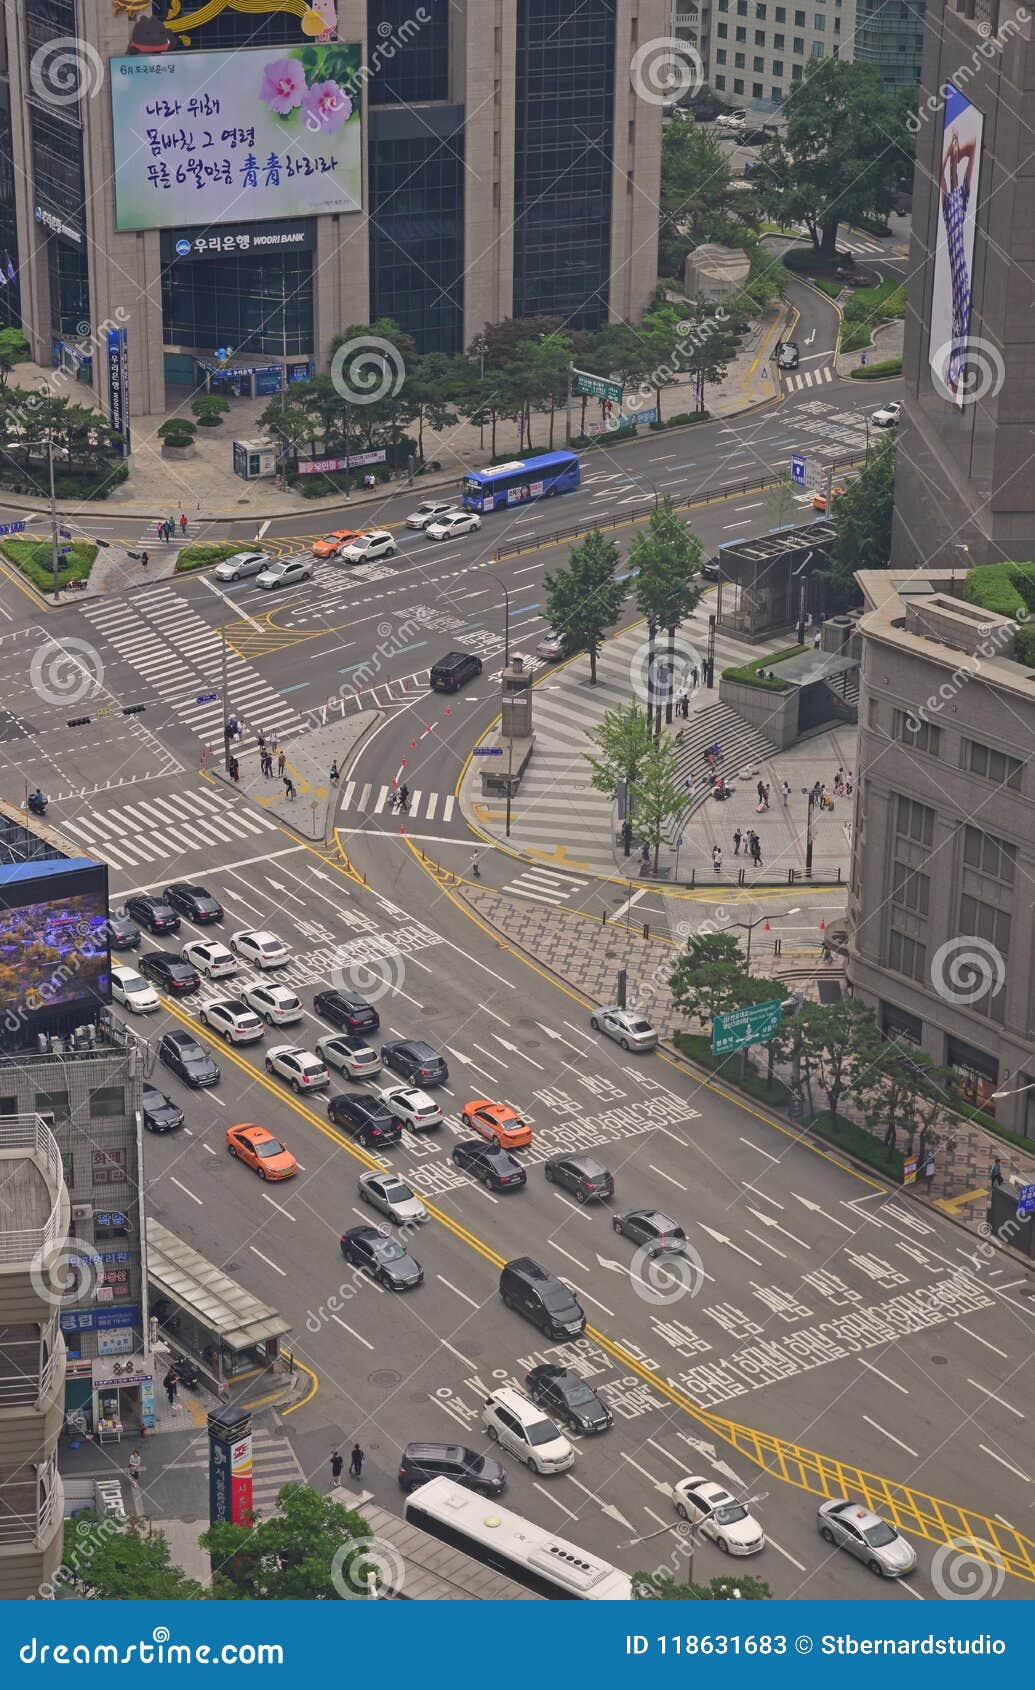 traffic on a main road in myeongdong district, seoul, south korea